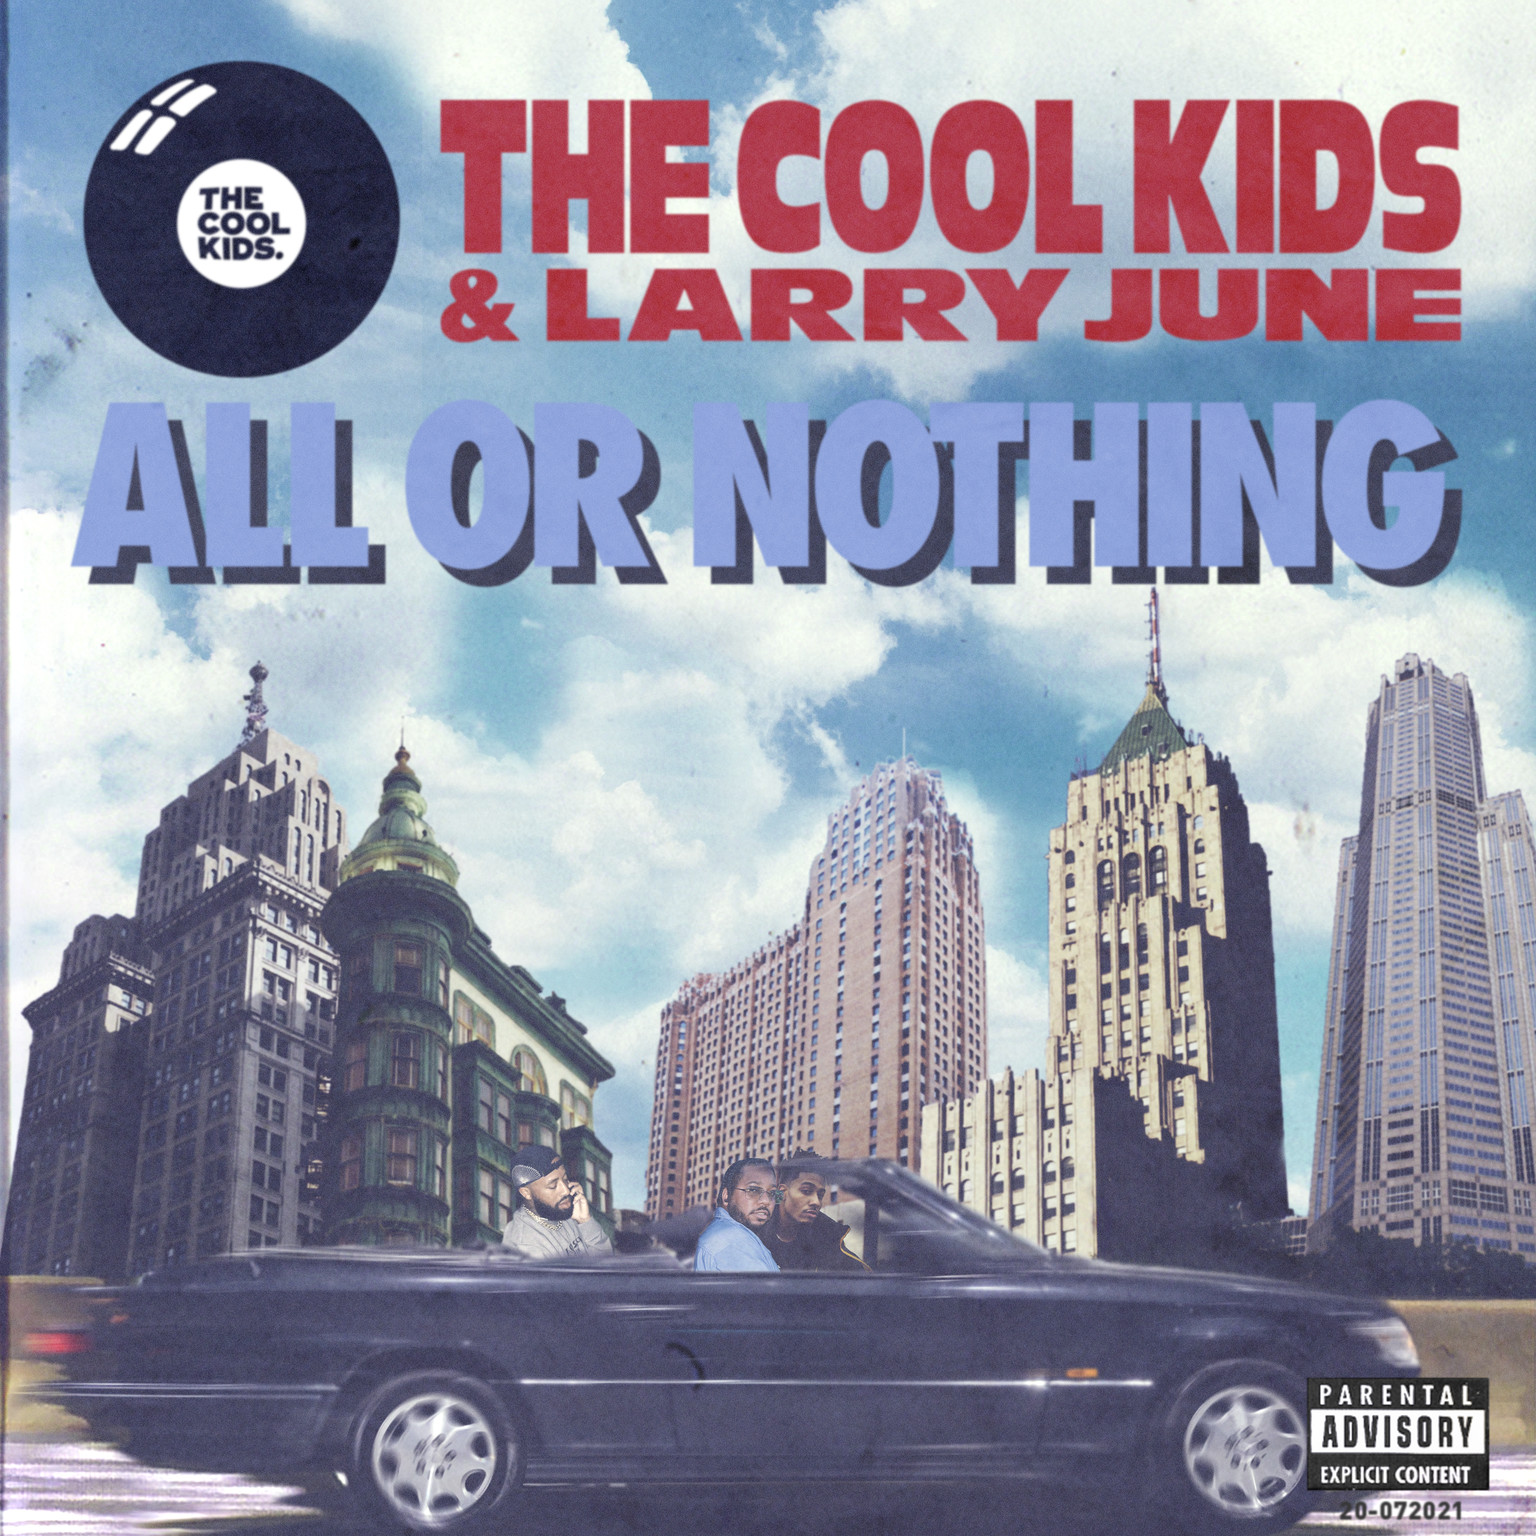 The Cool Kids Tap Larry June For New Single “All Or Nothing”